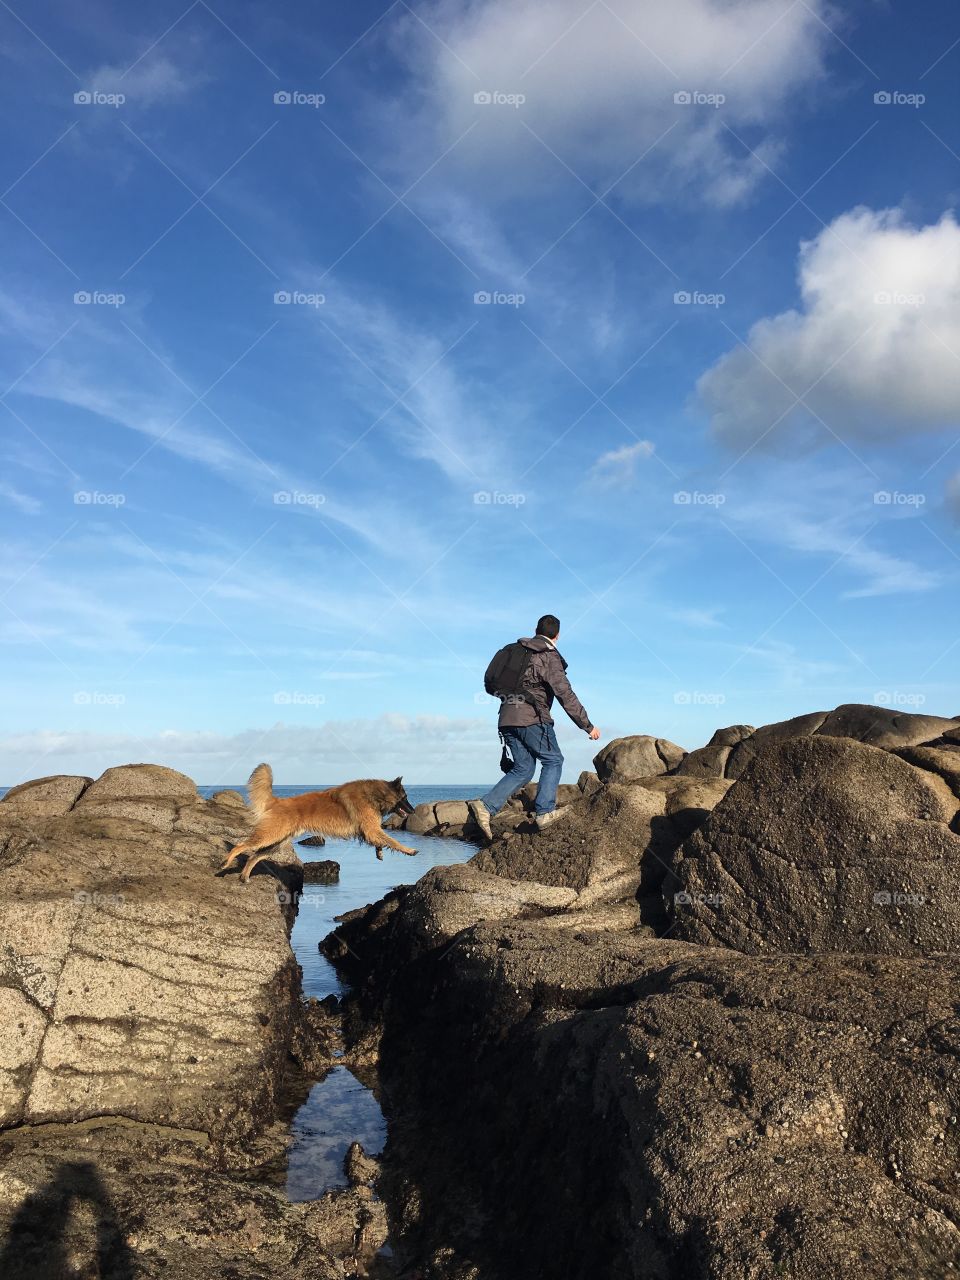 Max the dog and his friend jumping on the rocks